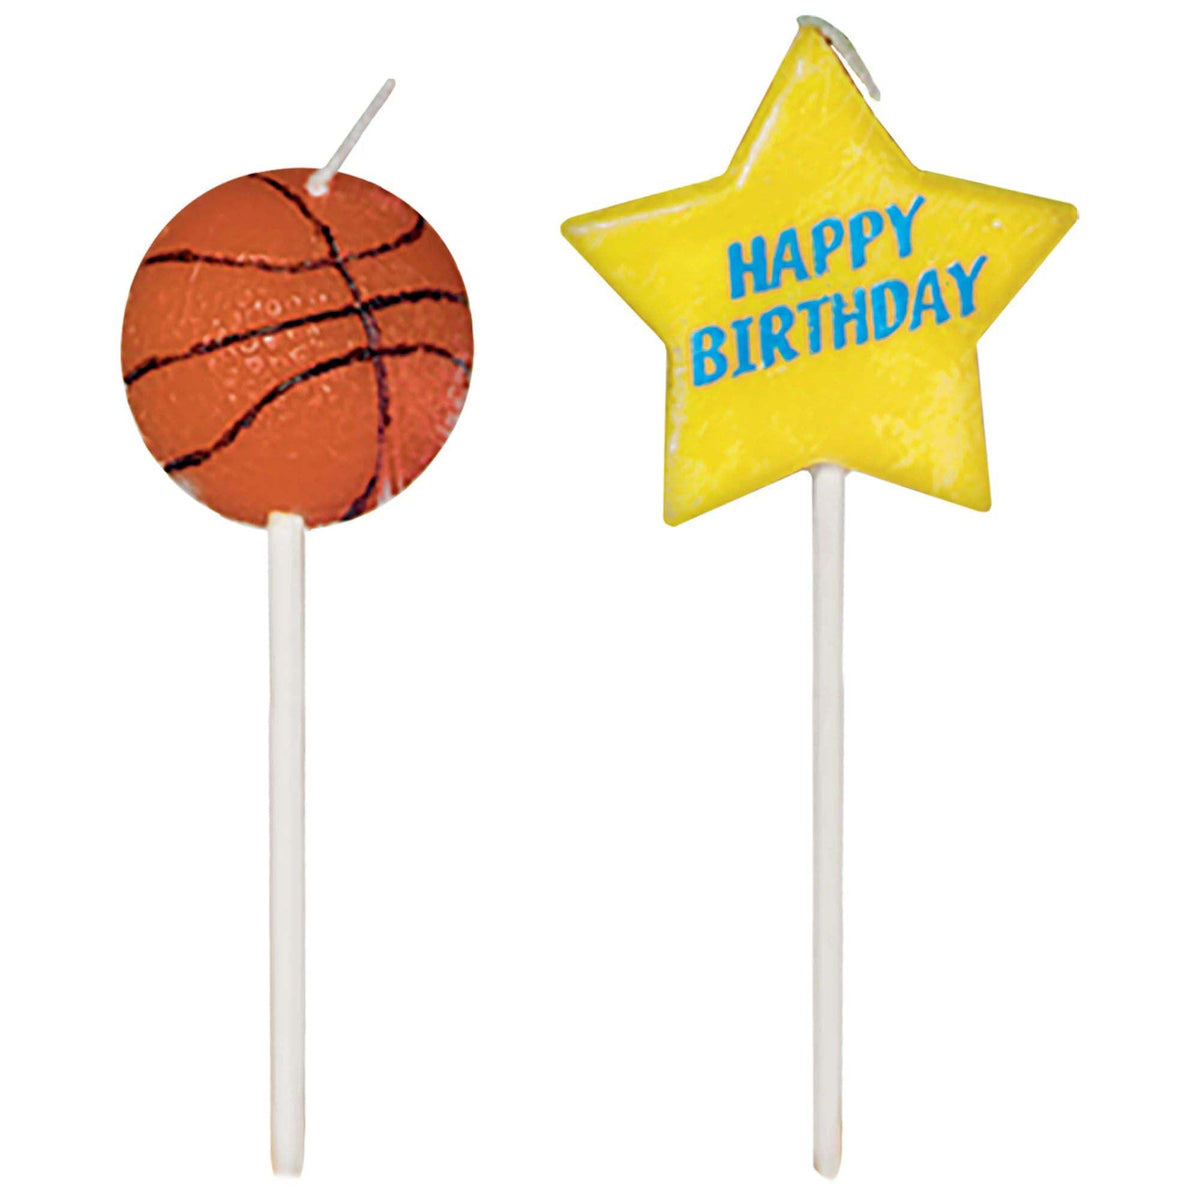 AMSCAN CA Theme Party Basketball Cake Candles, 3 Inches, 6 Count